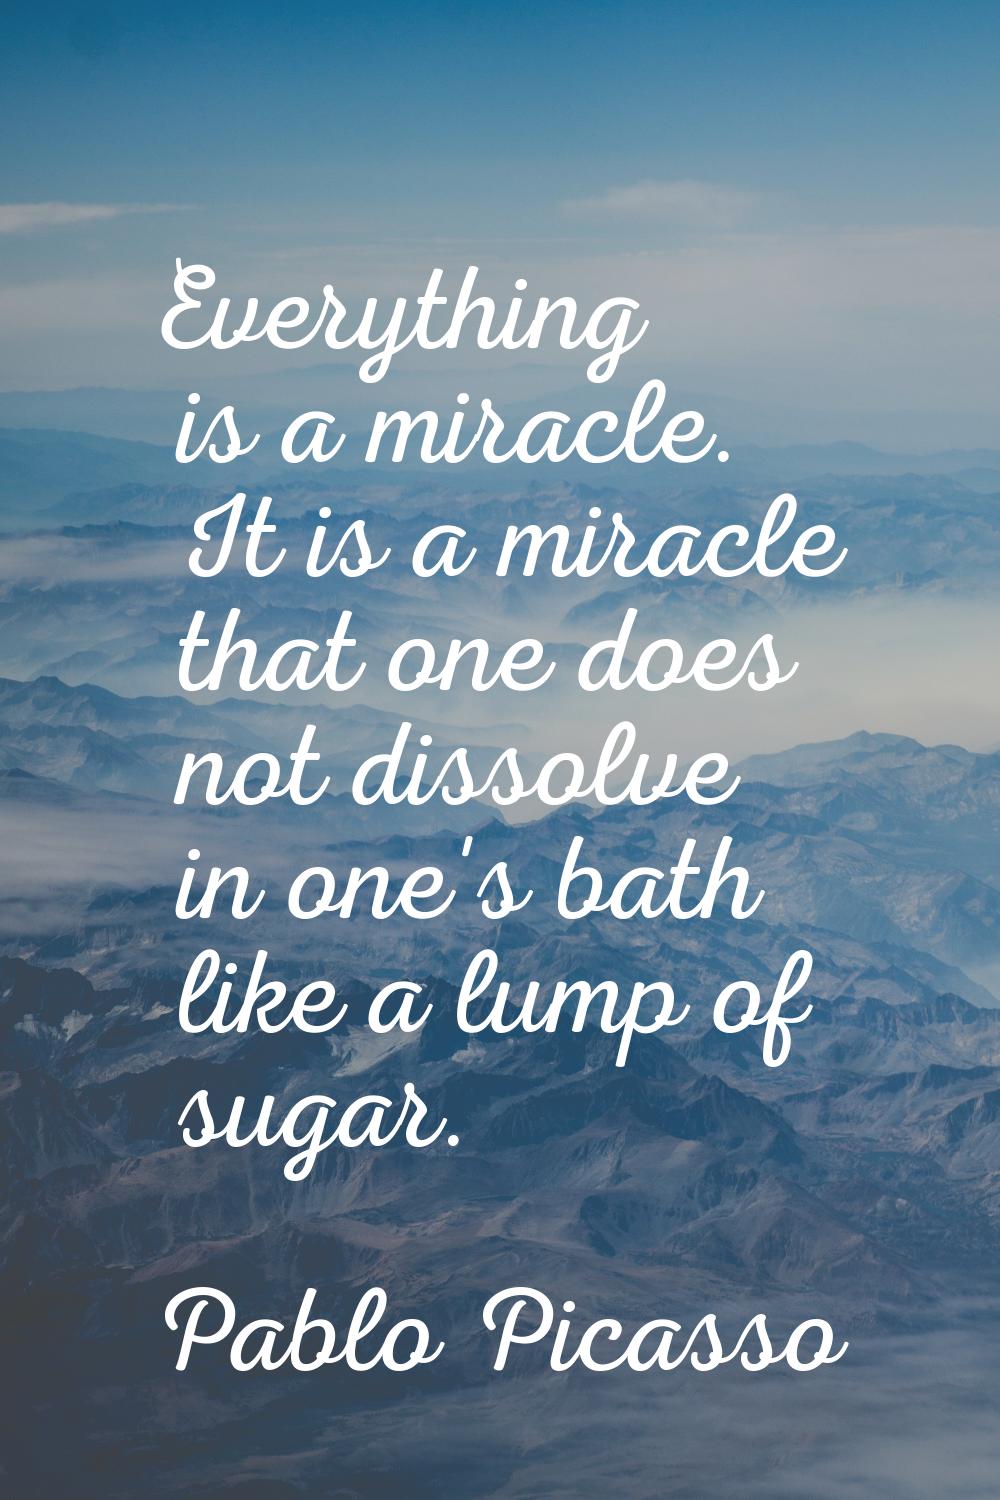 Everything is a miracle. It is a miracle that one does not dissolve in one's bath like a lump of su